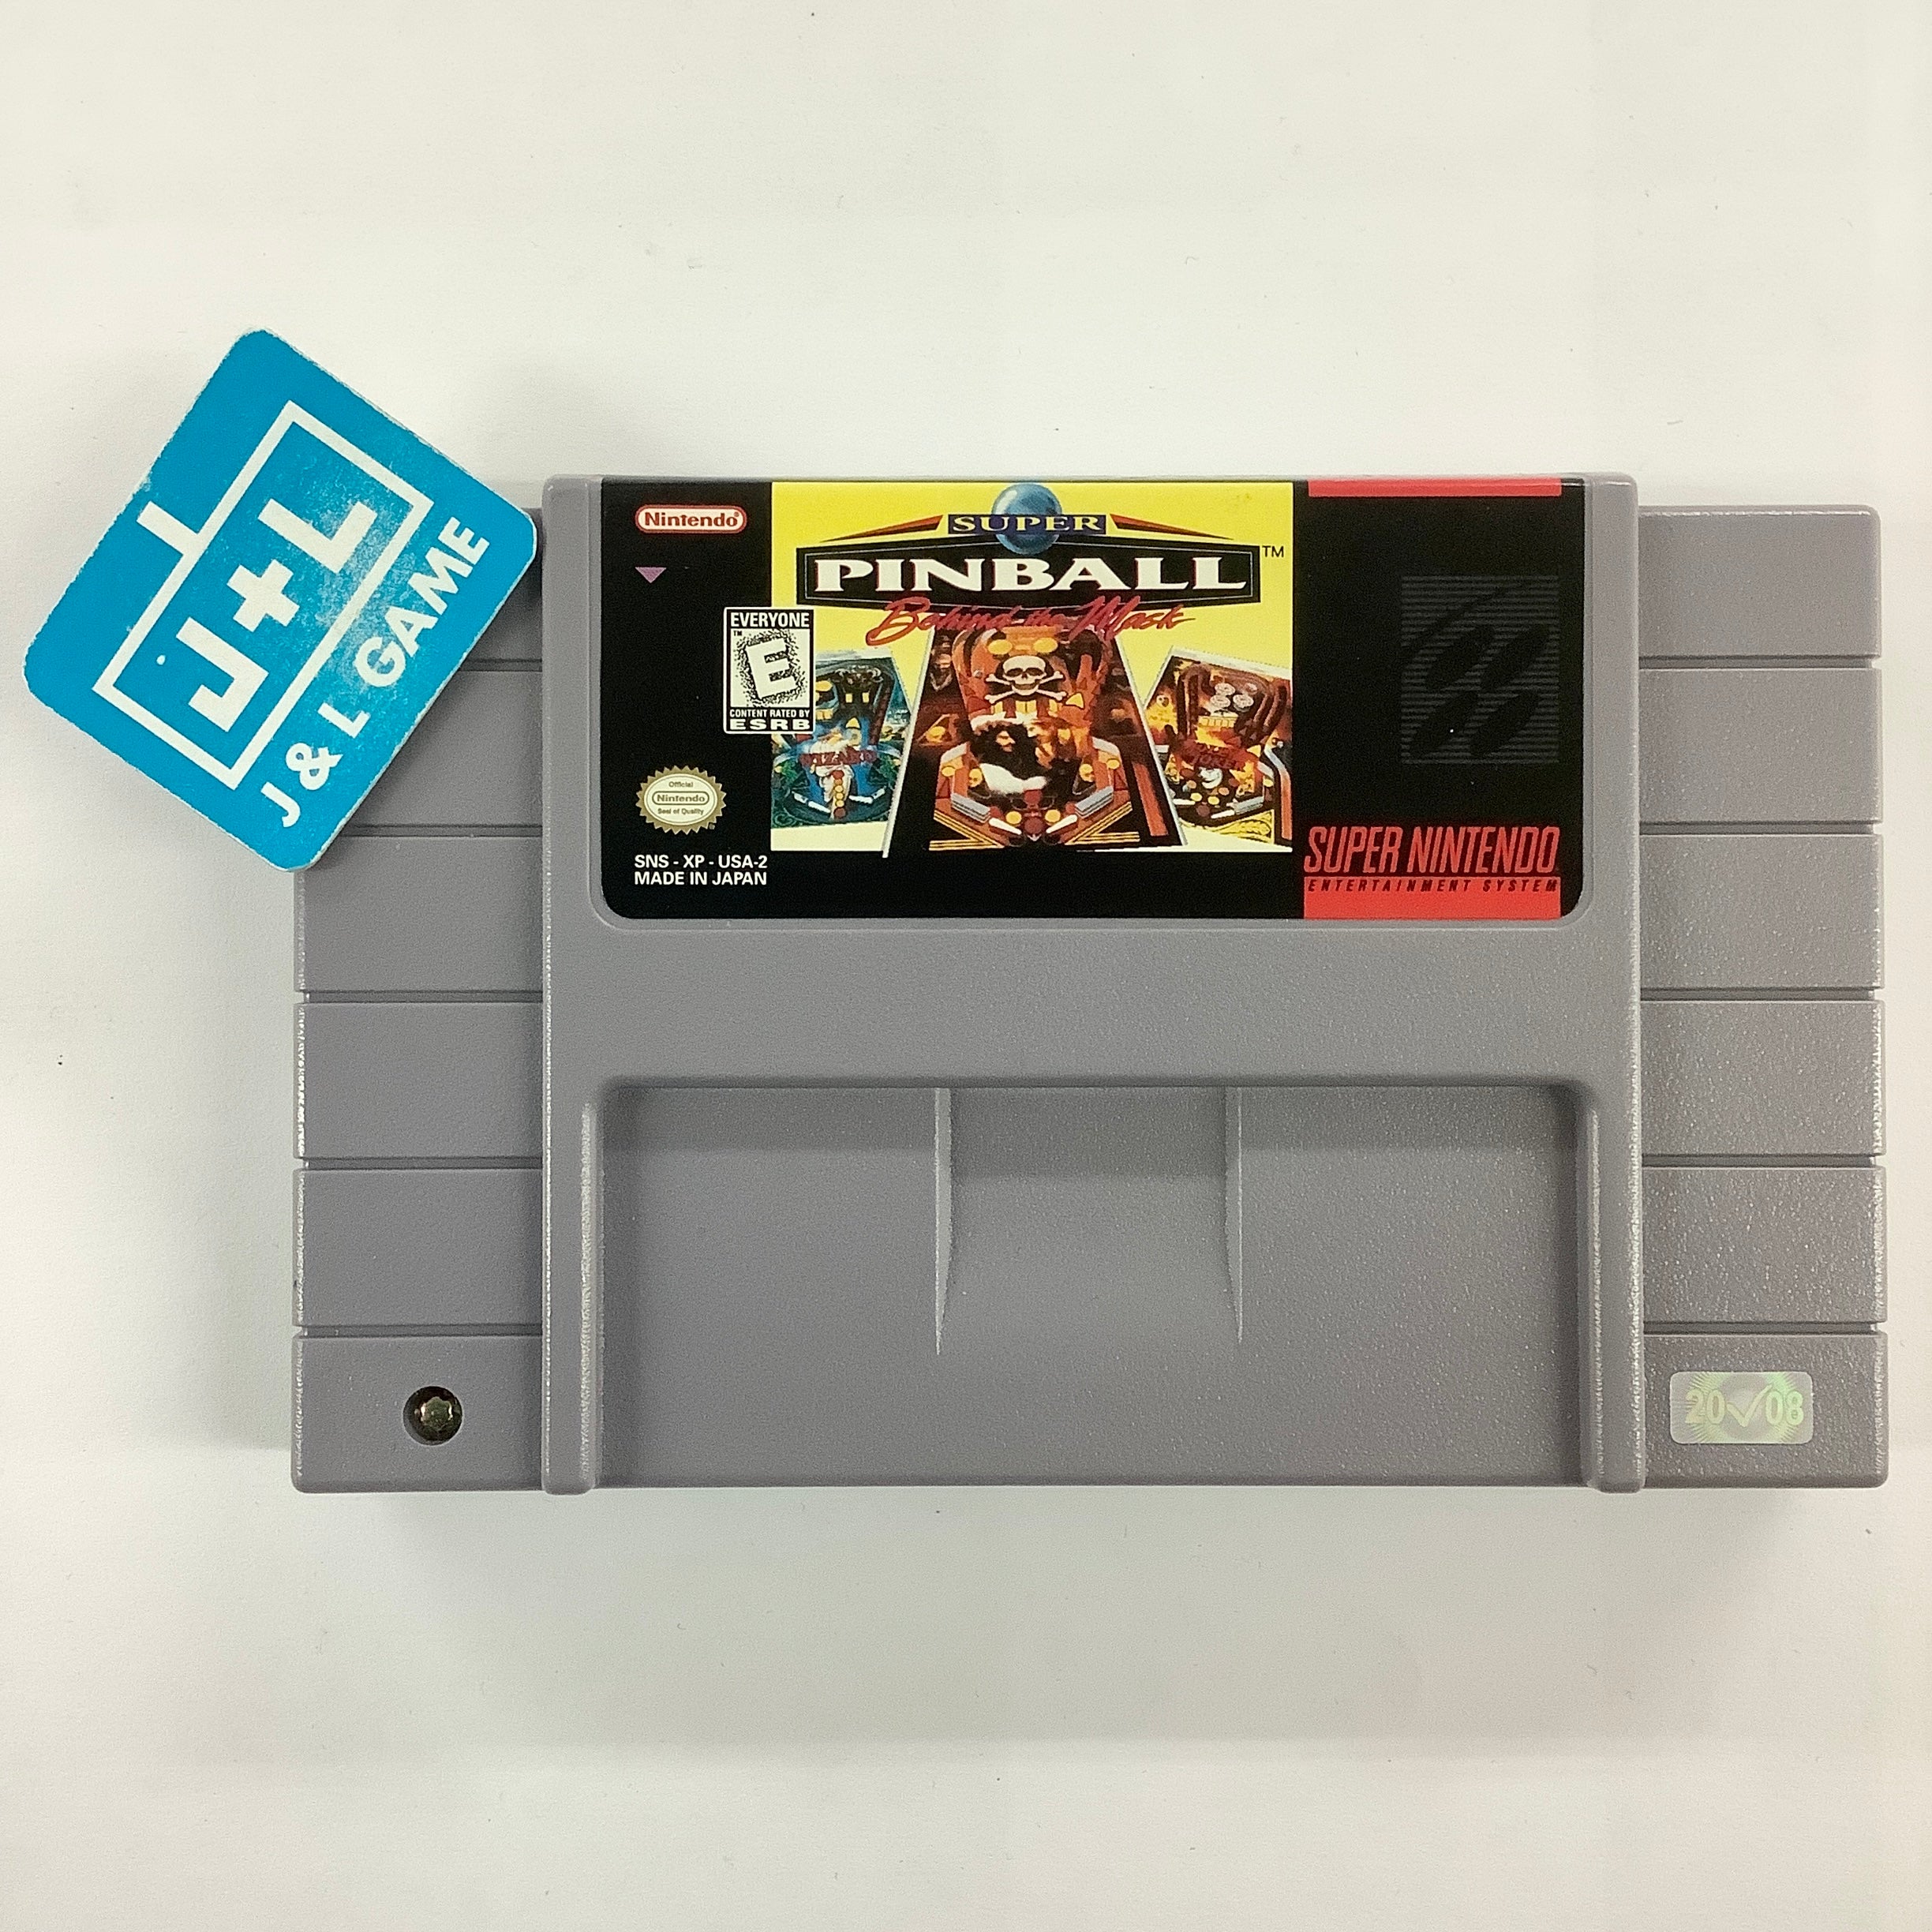 Super Pinball: Behind the Mask - (SNES) Super Nintendo [Pre-Owned] Video Games Nintendo   